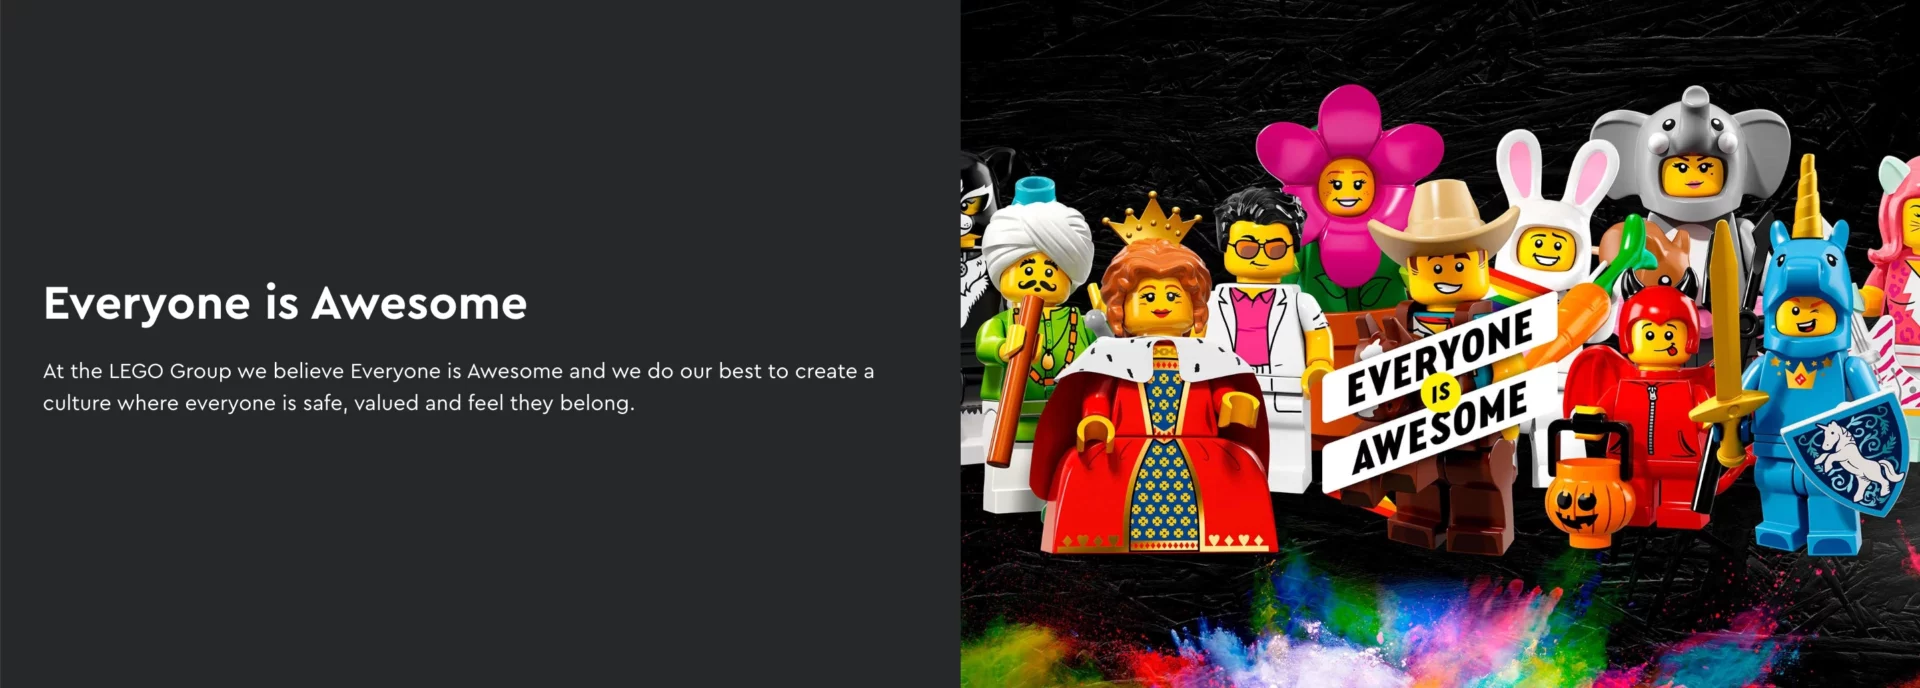 recrutiment page by Lego